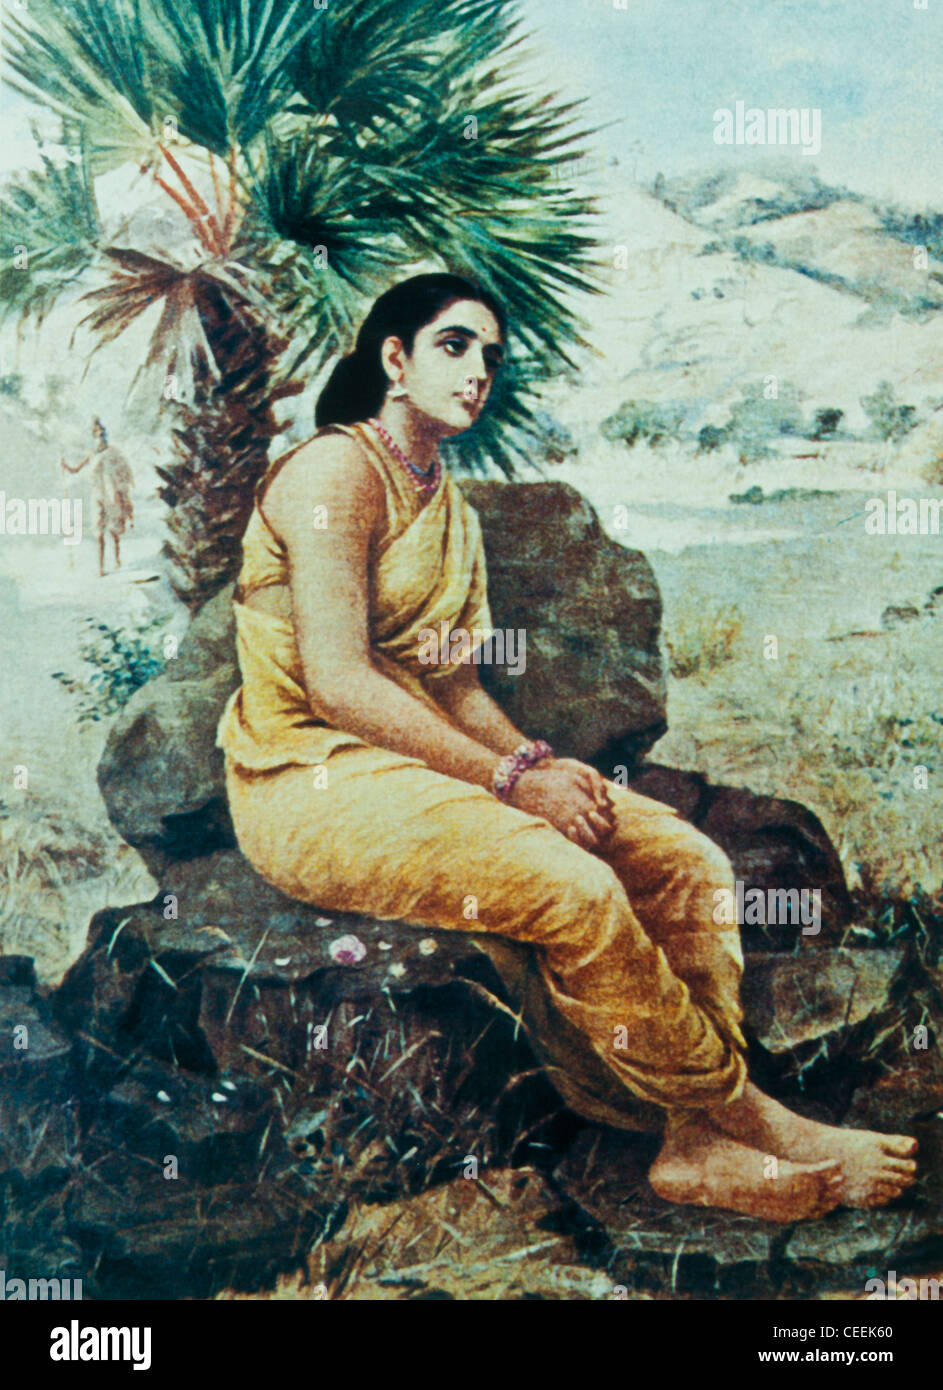 Sakuntala seated under the palmyrah tree, lost in thoughts. Oil painting on canvas by Raja Ravi Varma dated 1901 Stock Photo